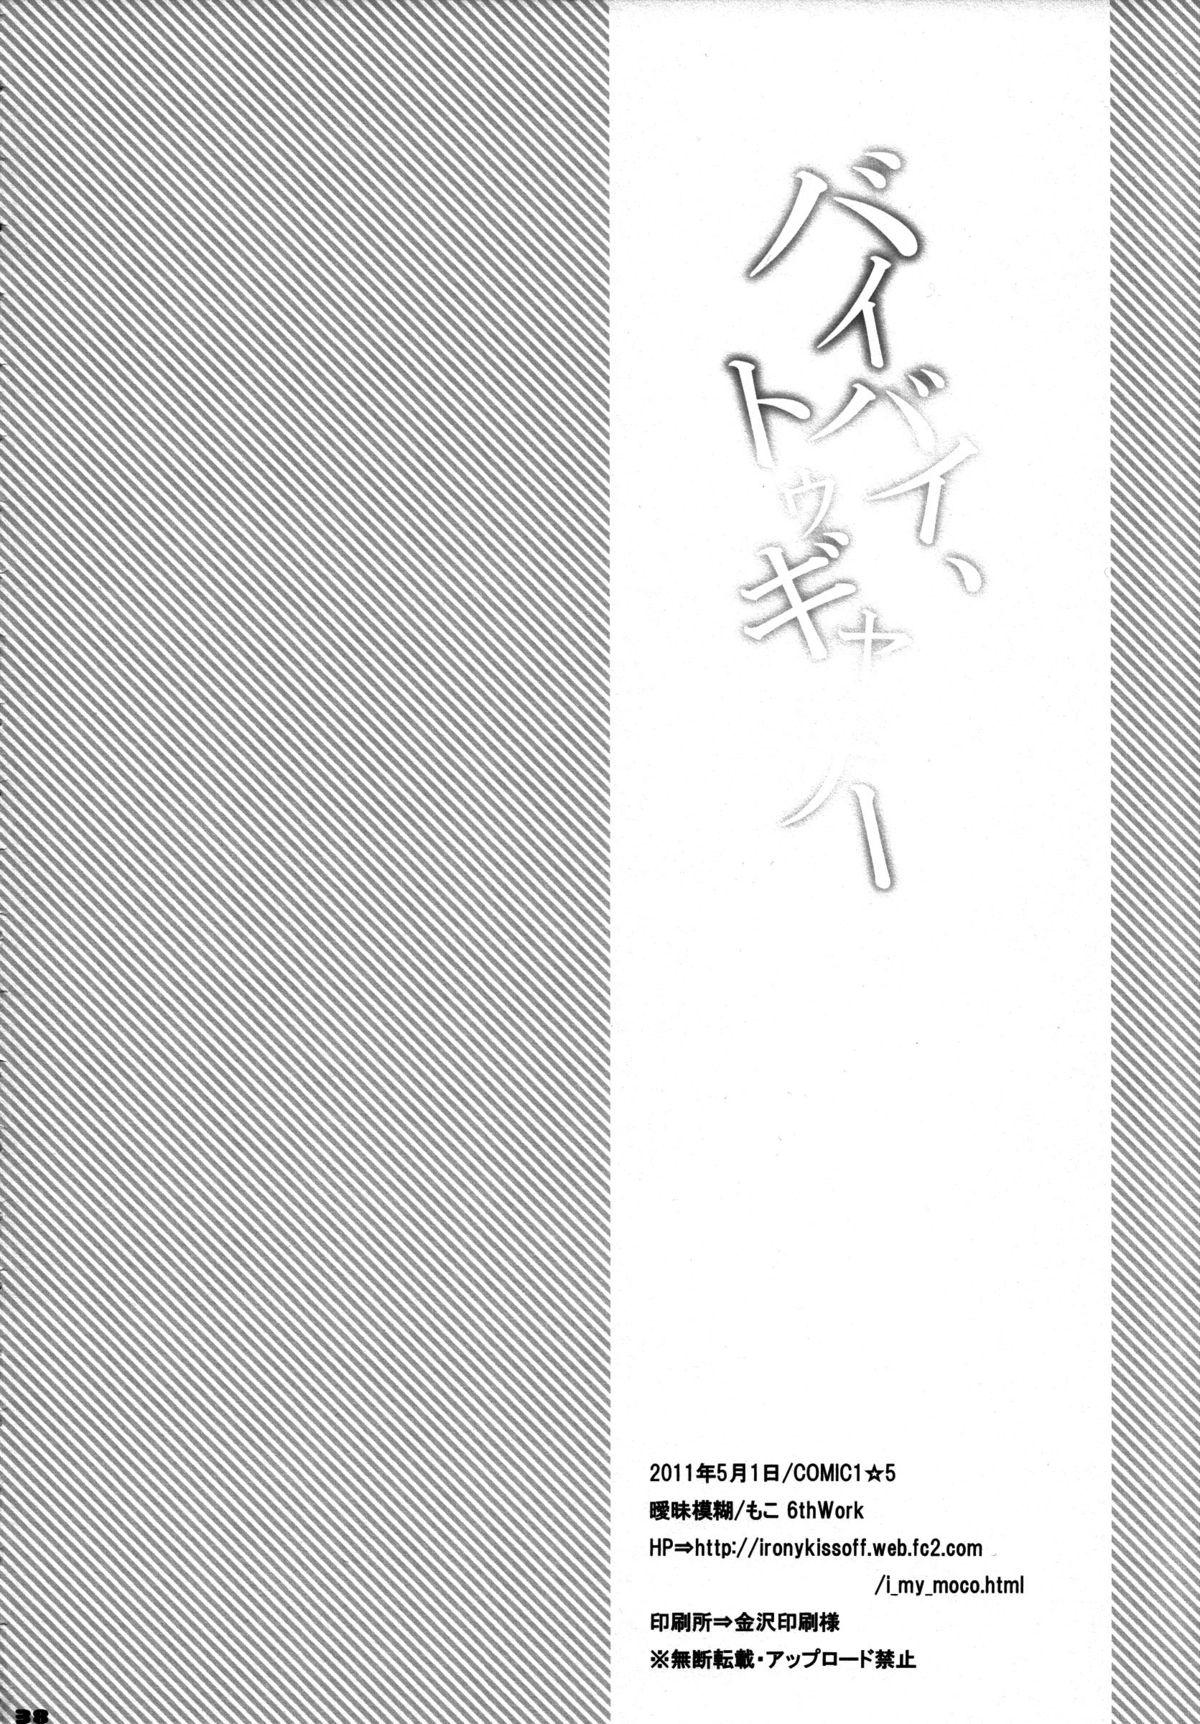 Face Fucking Bye Bye, Together - Puella magi madoka magica Mouth - Page 37